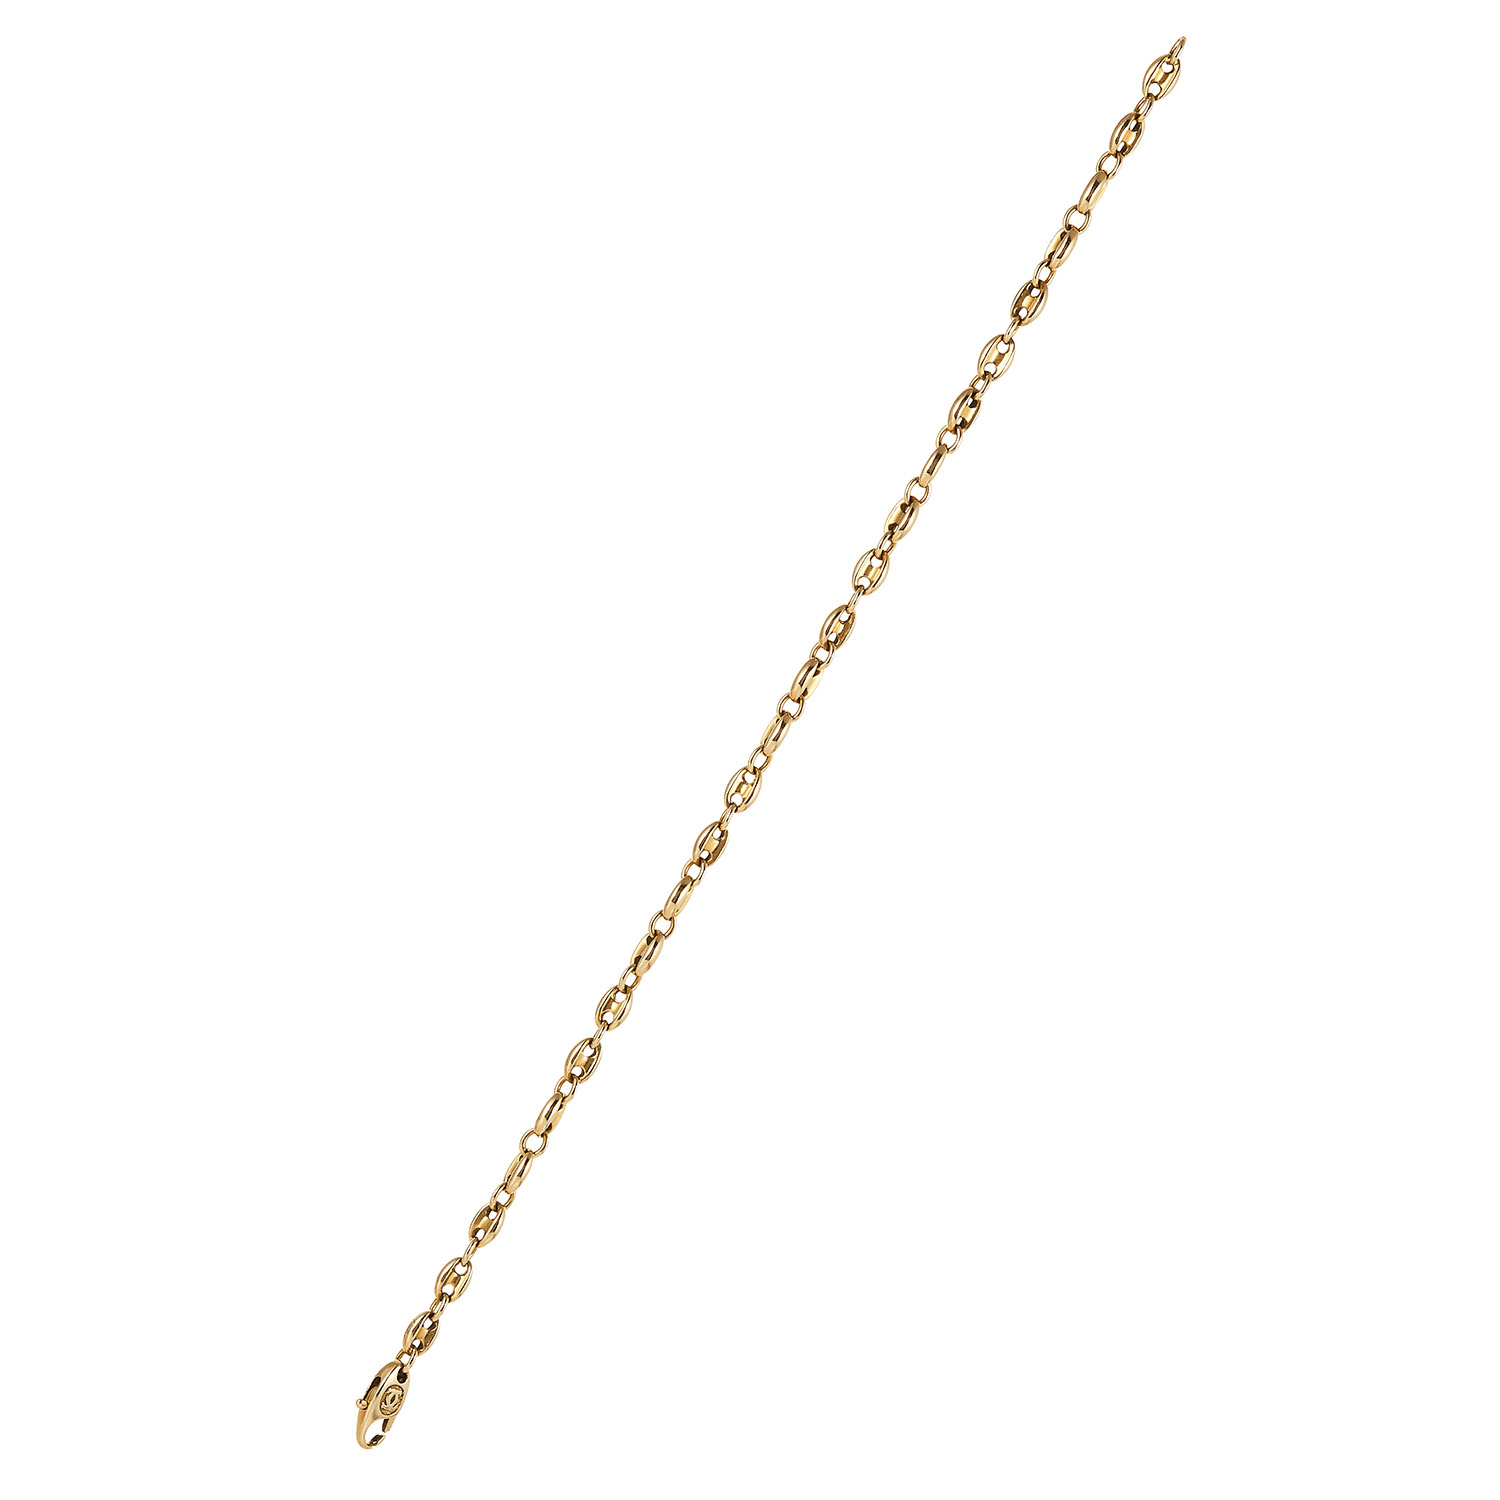 A VINTAGE GOLD LINK BRACELET, CARTIER in 18ct yellow gold, signed Cartier and numbered, stamped 750,